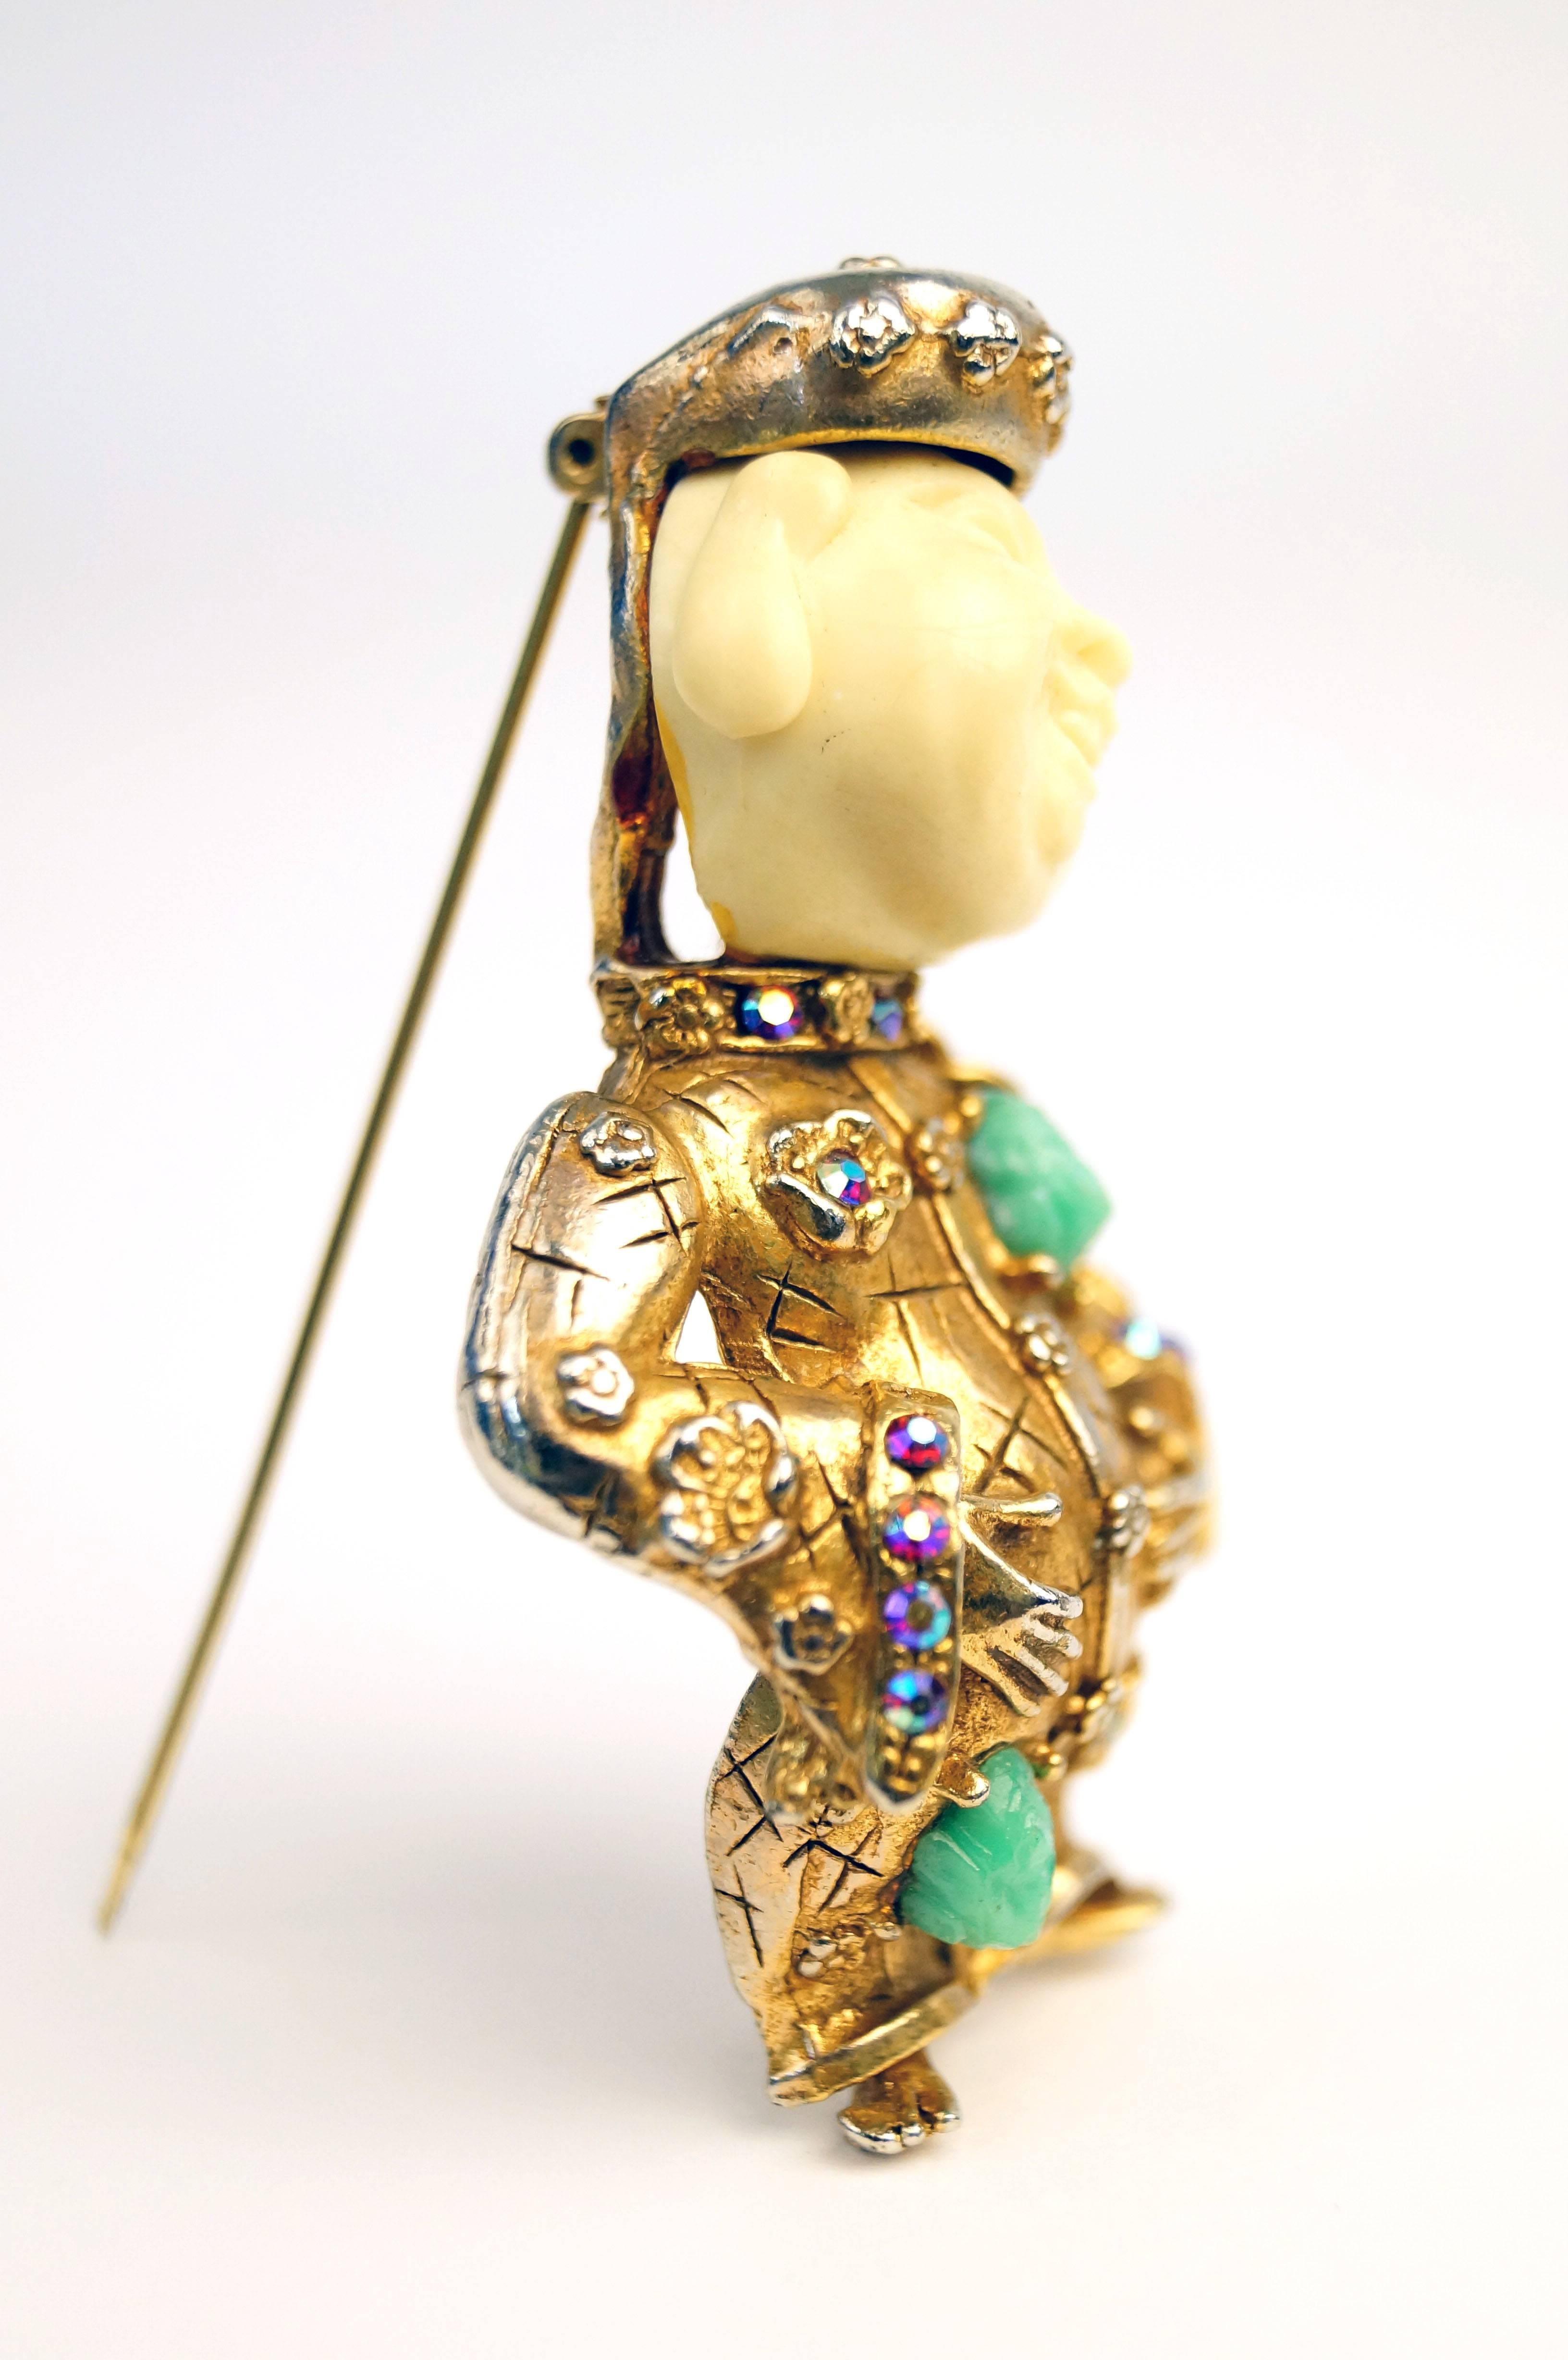 
This highly collectible and extremely fun vintage "laughing Buddha" brooch by HAR - Hargo Creations of NY, features a figure with a faux ivory head and gold-tone body. The robe is adorned with faux jade nuggets and malachite stones as